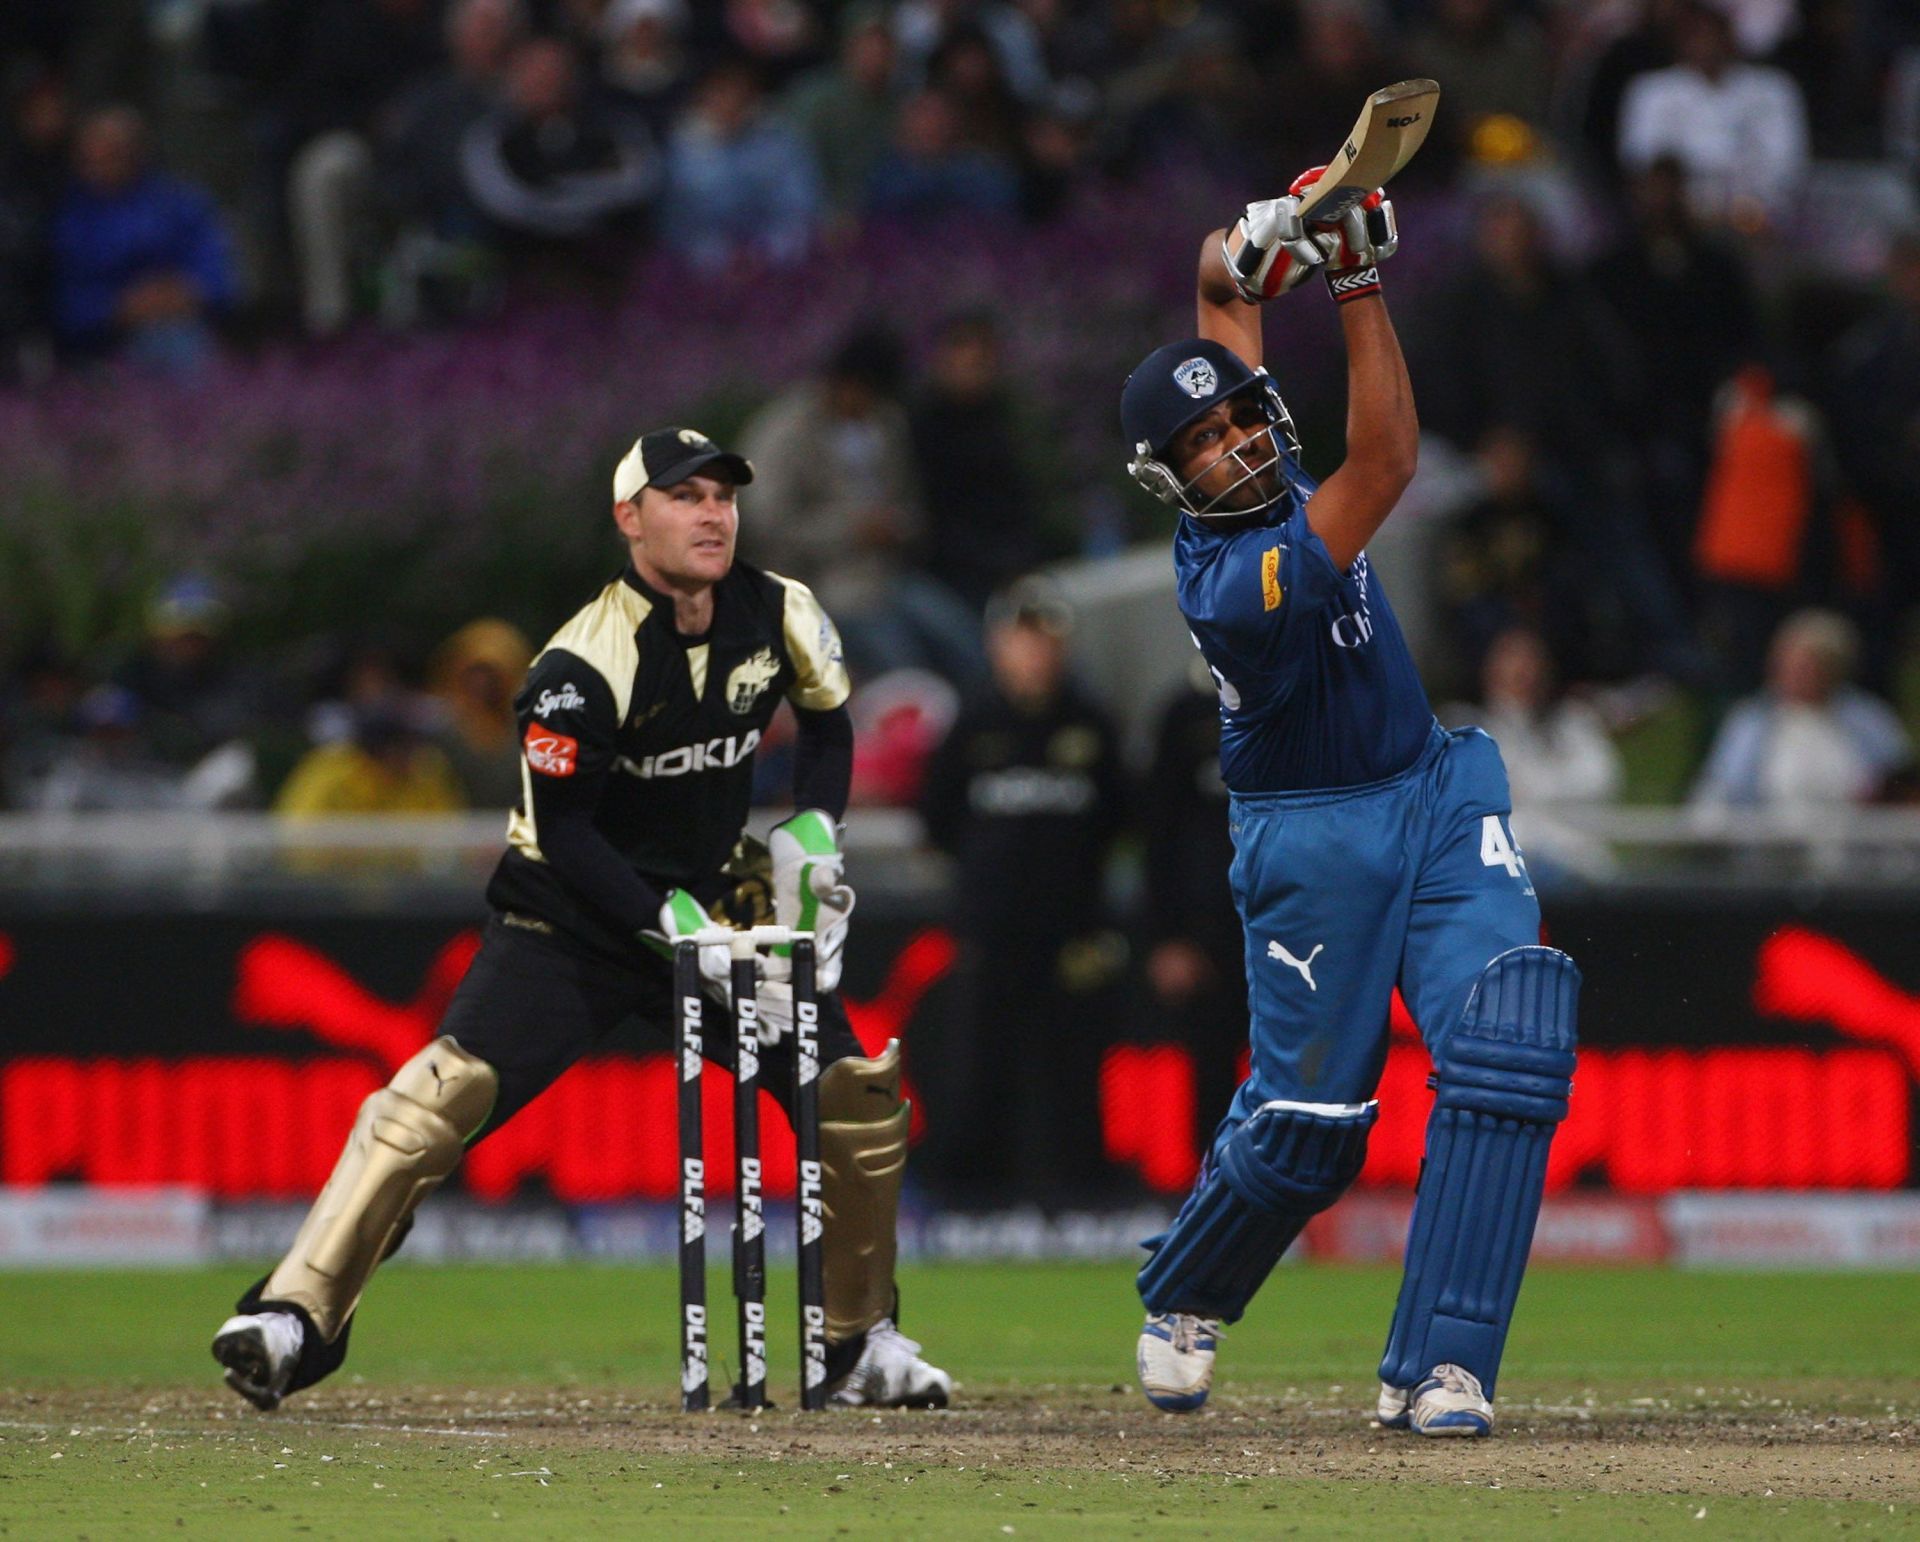 Rohit Sharma batting for Deccan Chargers. Pic: Getty Images